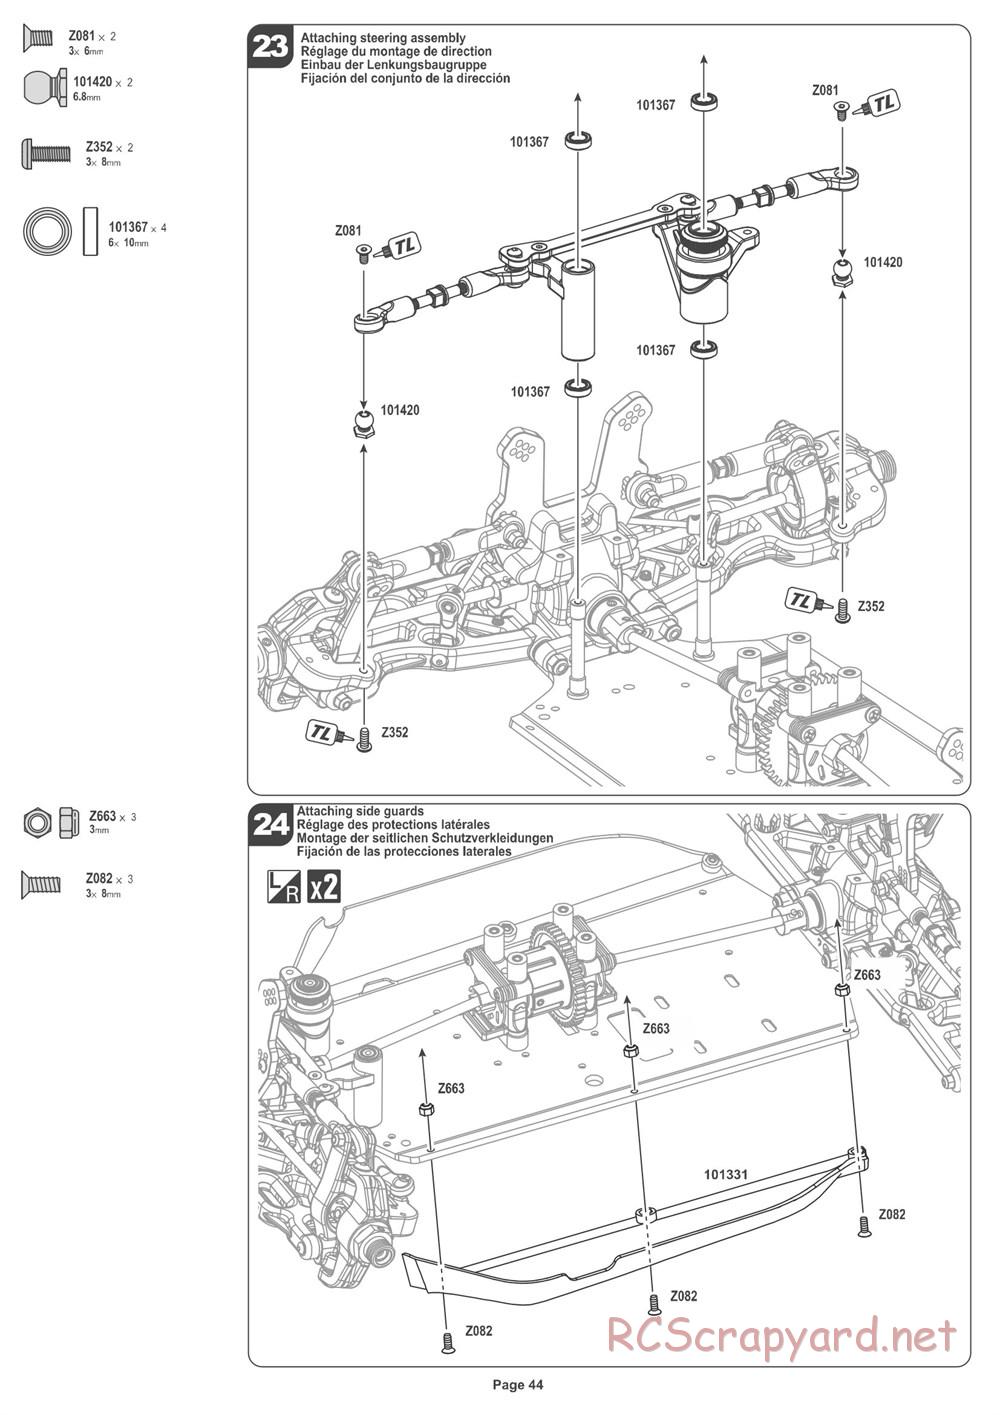 HPI - Pulse 4.6 Buggy - Manual - Page 44